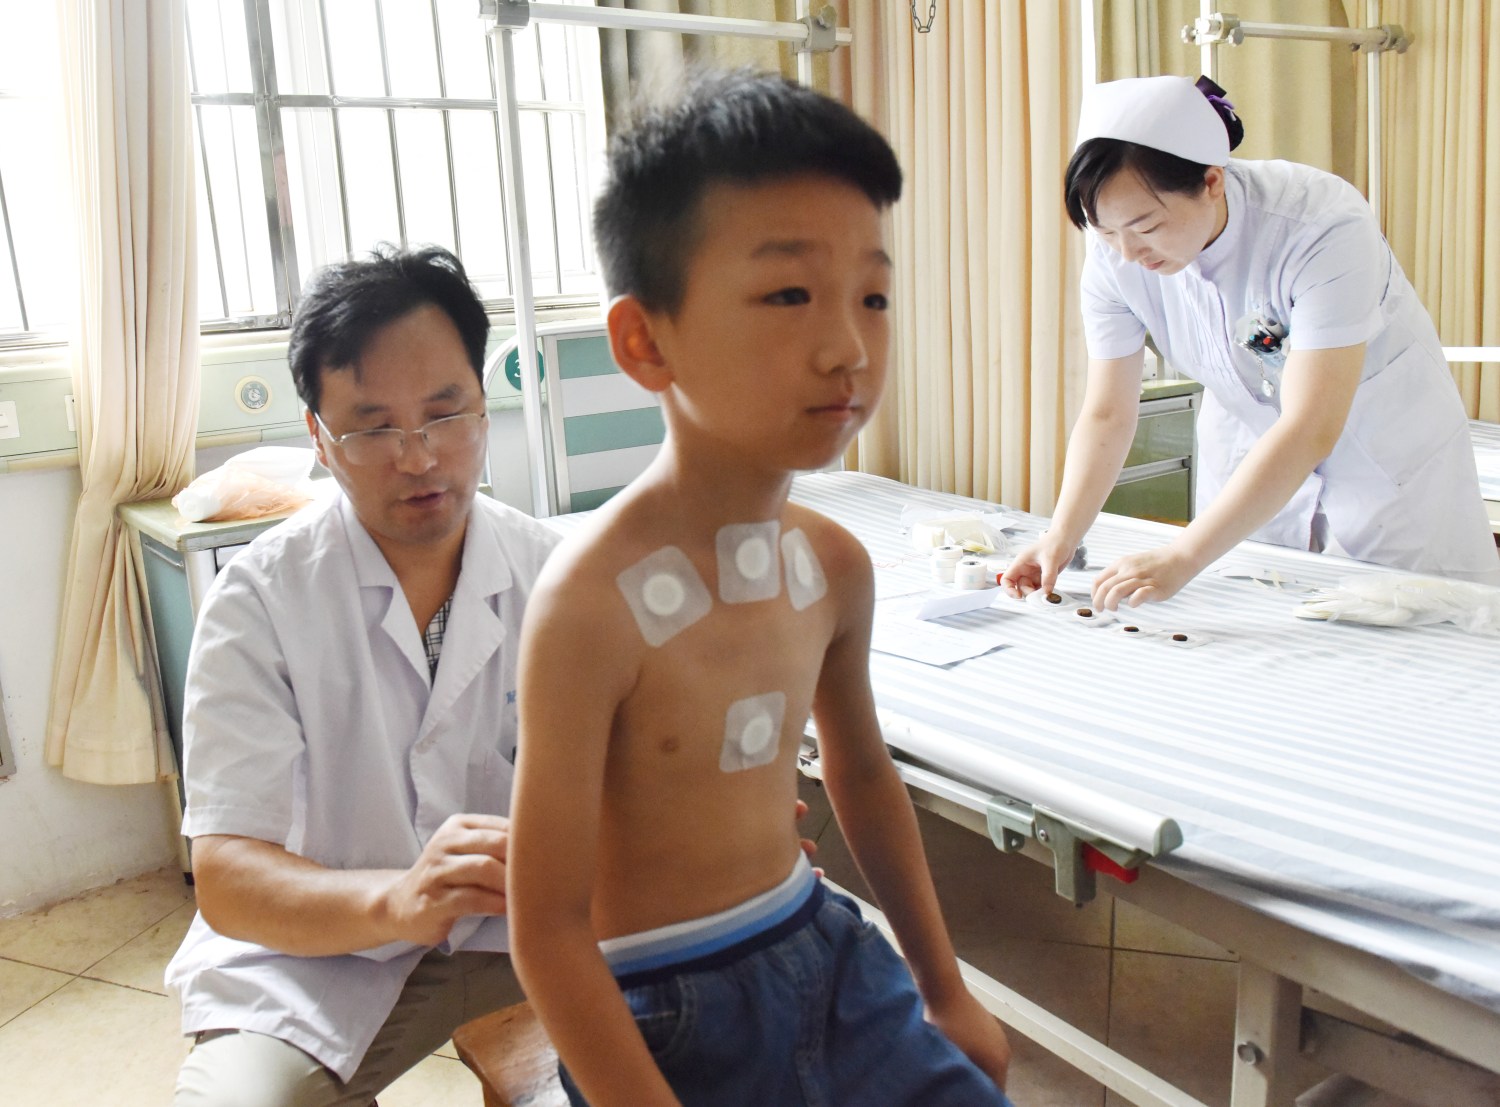 A doctor sticks the Sanfu Paste, a traditional Chinese medicine treatment in the hottest days of summer, on a boy at a hospital in Hefei city, east China's Anhui province, 17 July 2018.Sanfu Paste, also known as dog-days paste, is a traditional Chinese medicine treatment. During the treatment, patients will be stuck with the Chinese medicine contained in the paste on acupoints during the dog days, the hottest and most sultry days of summer. This treatment is regarded to be able to cure such chronic diseases like asthma. Monday is the first day of dog days and hospitals are crammed with citizens for the Sanfu Paste.No Use China. No Use France.